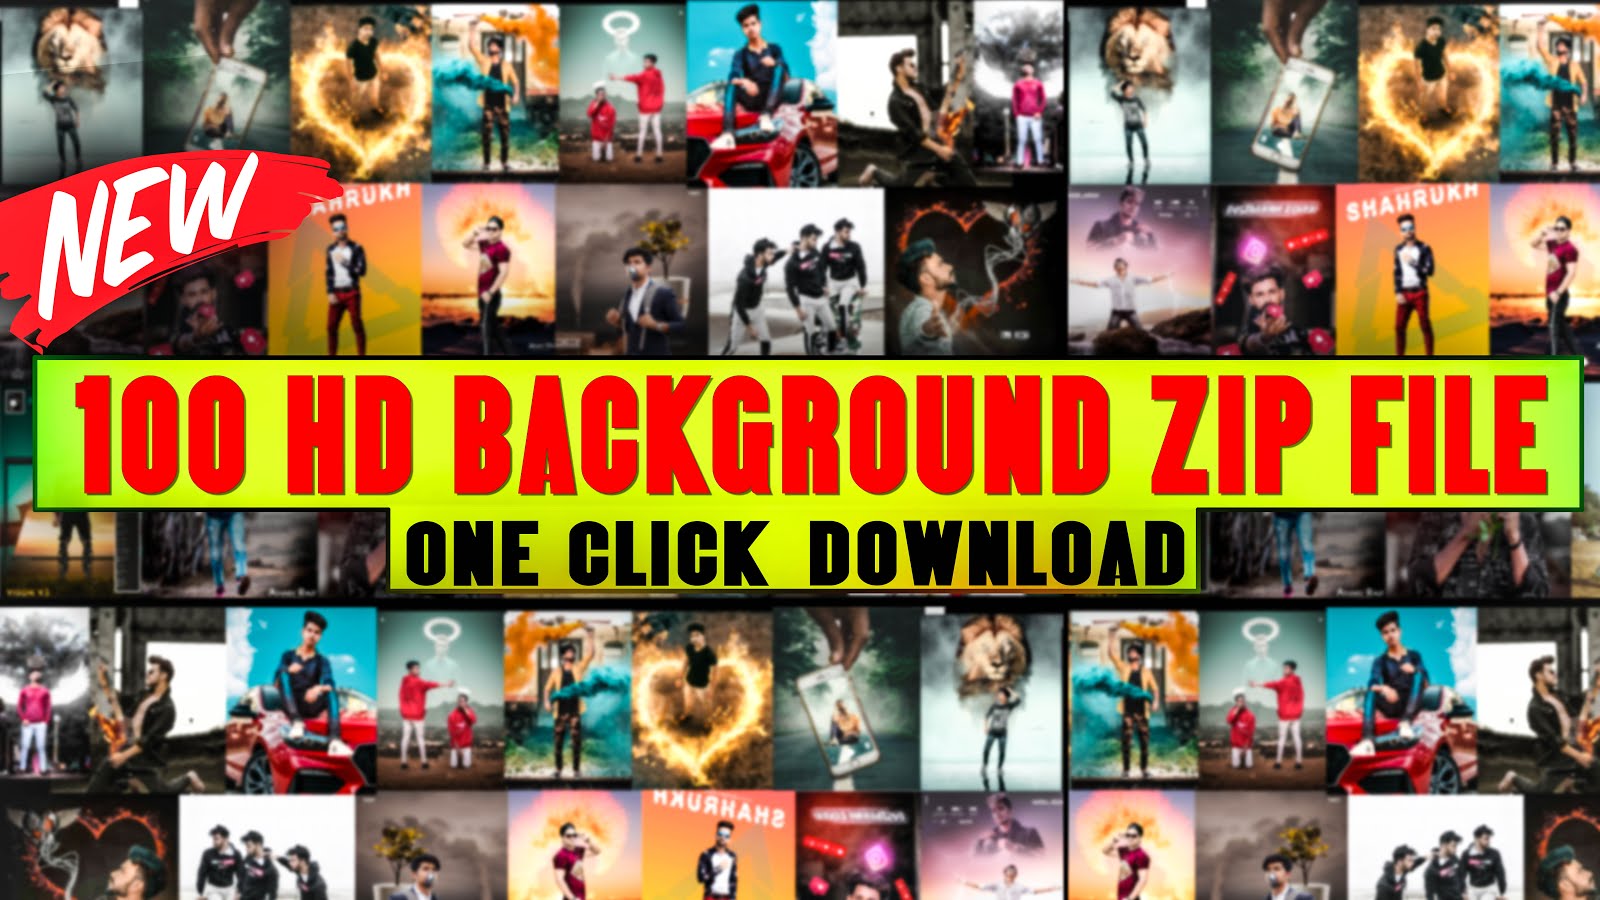 Cb Background Zip File Download New Collection 2018 For Picsart Photoshop Blurred Background Photography Iphone Background Images Desktop Background Pictures